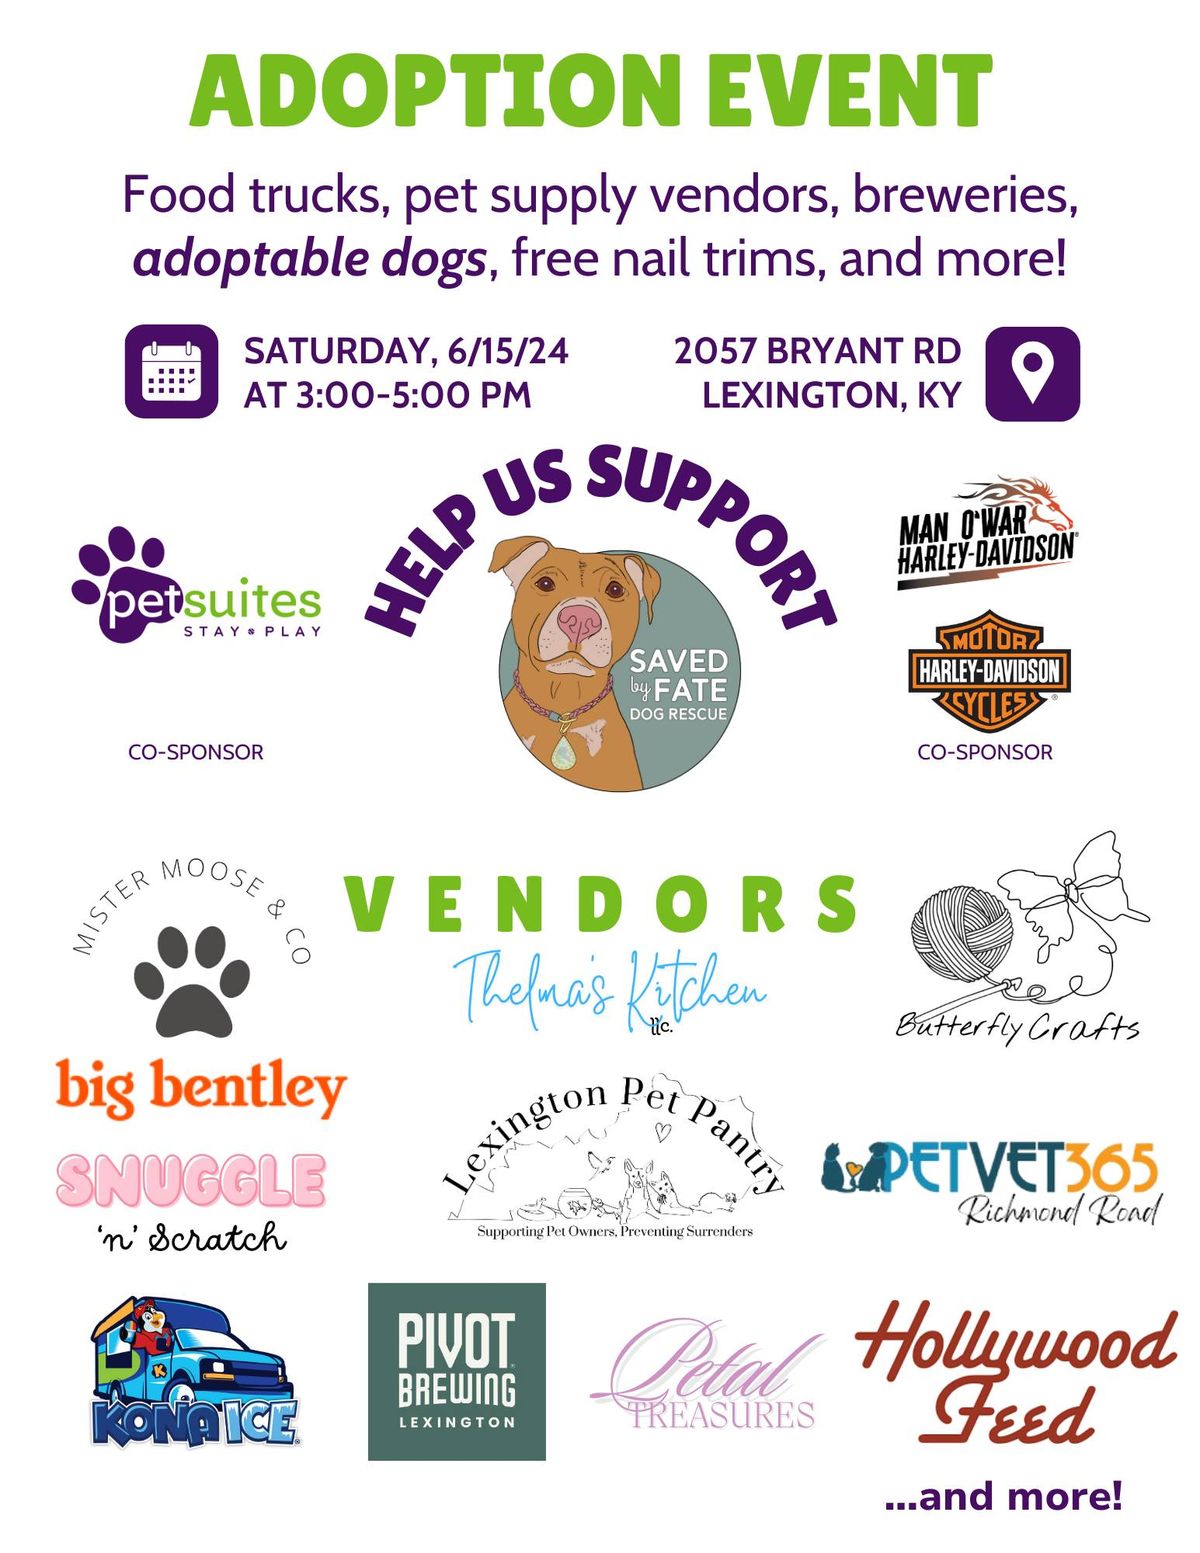 Adoption Event with Saved by Fate Dog Rescue